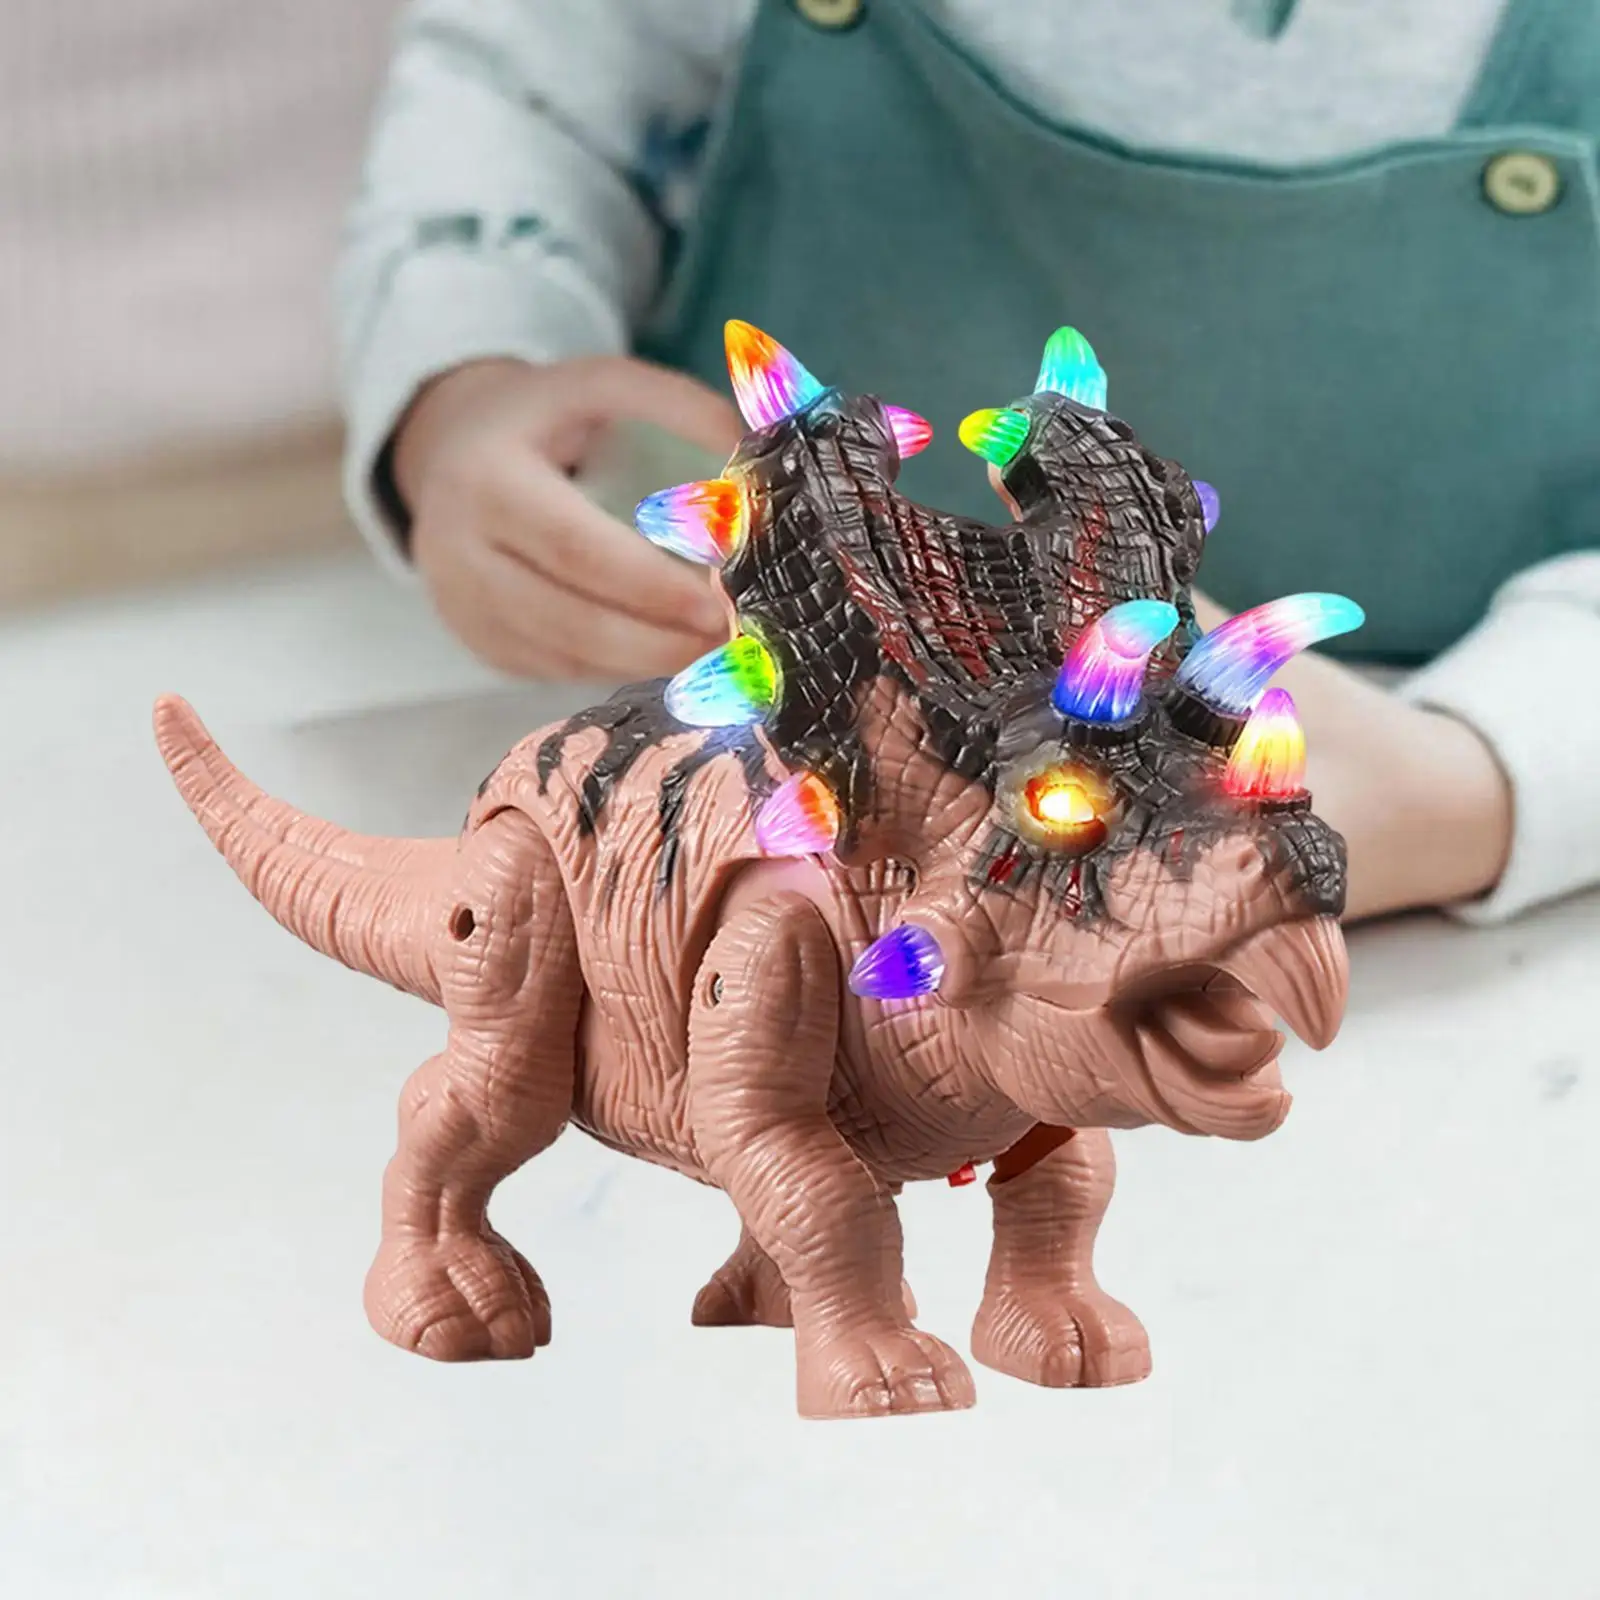 Realistic Electric Dinosaur Toys Action Figure for Kids Boys Birthday Gifts